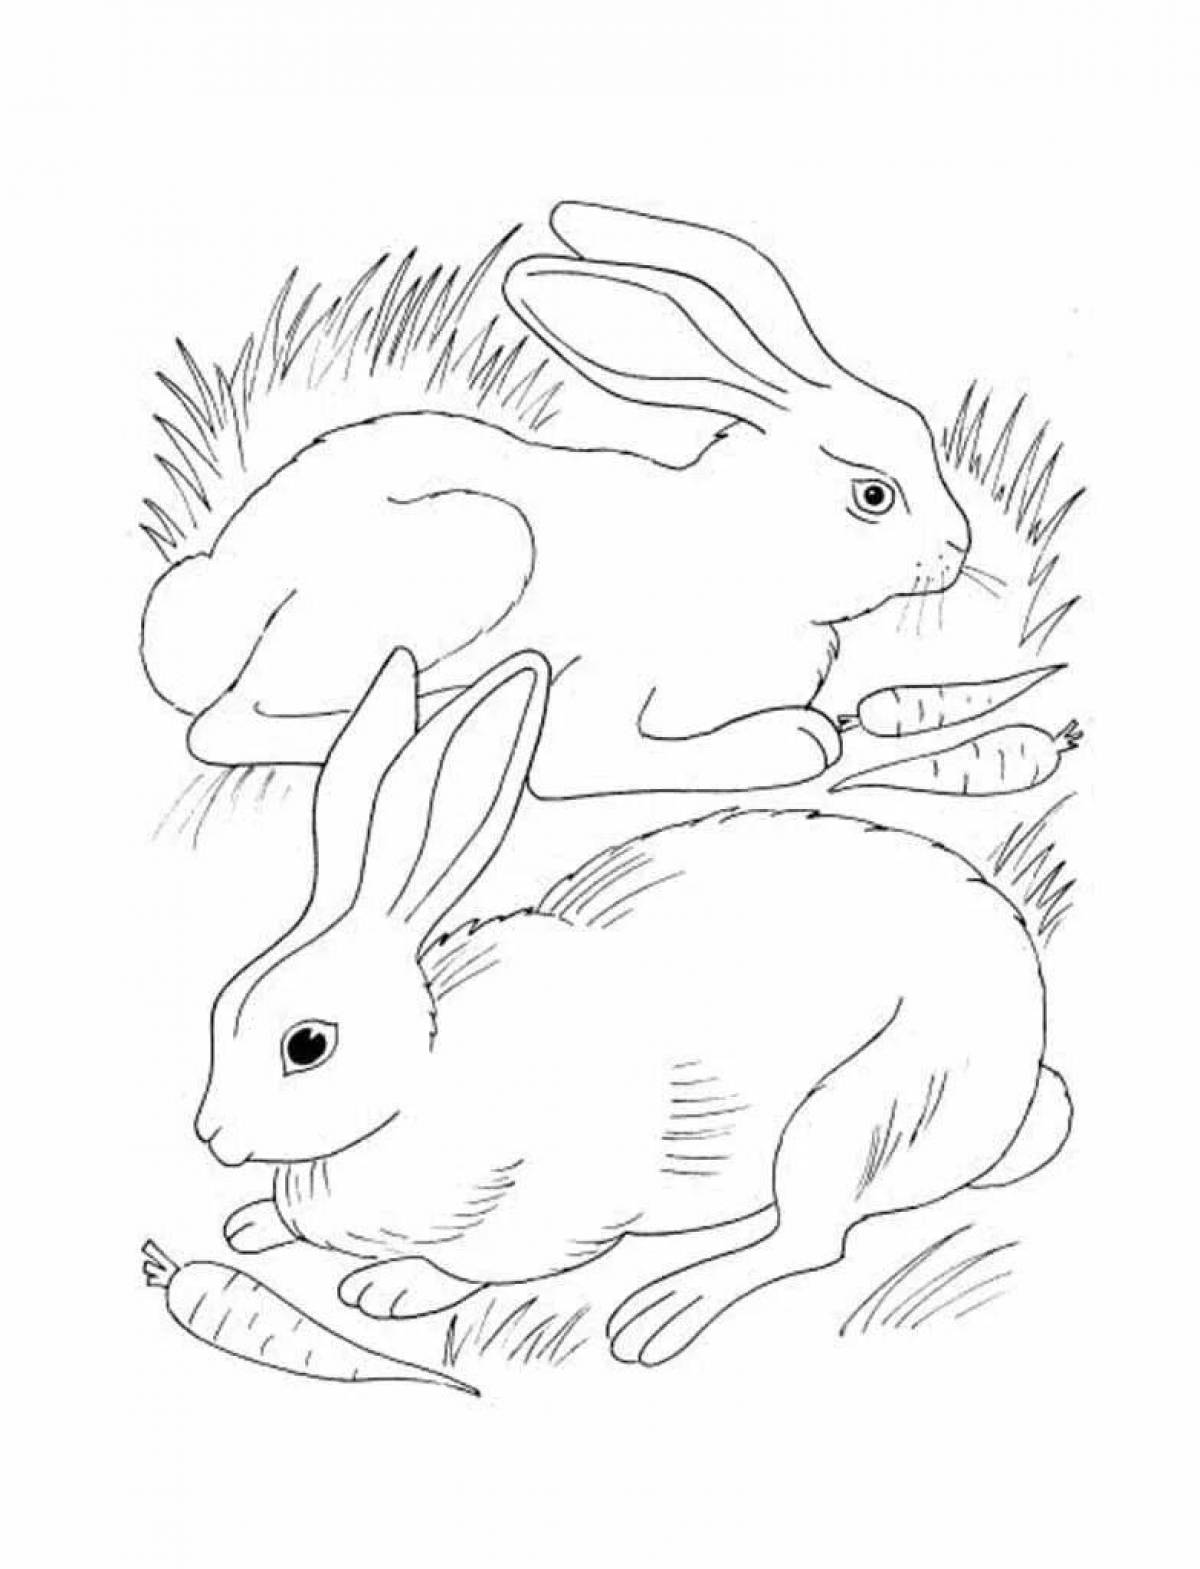 Coloring book shining hare and squirrel